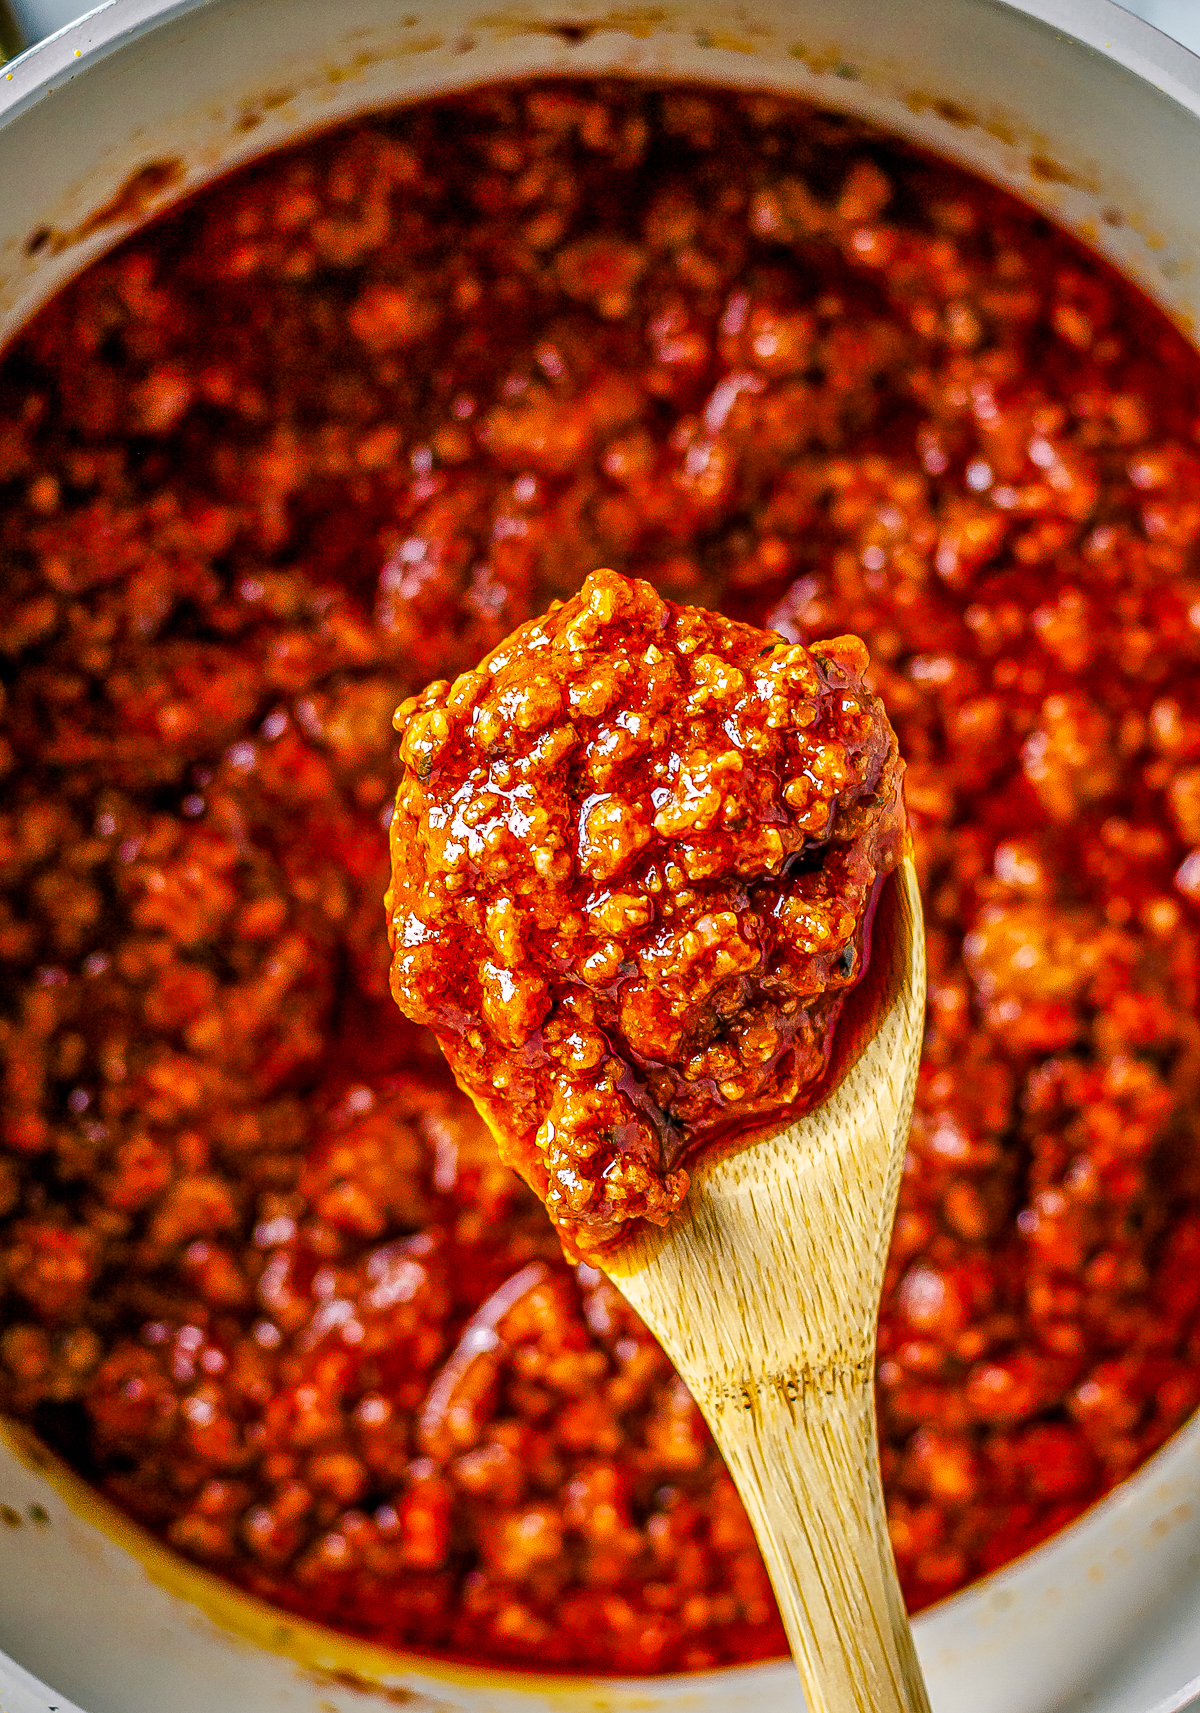 Wooden spoon holding up some of the Meat sauce Recipe from pan.